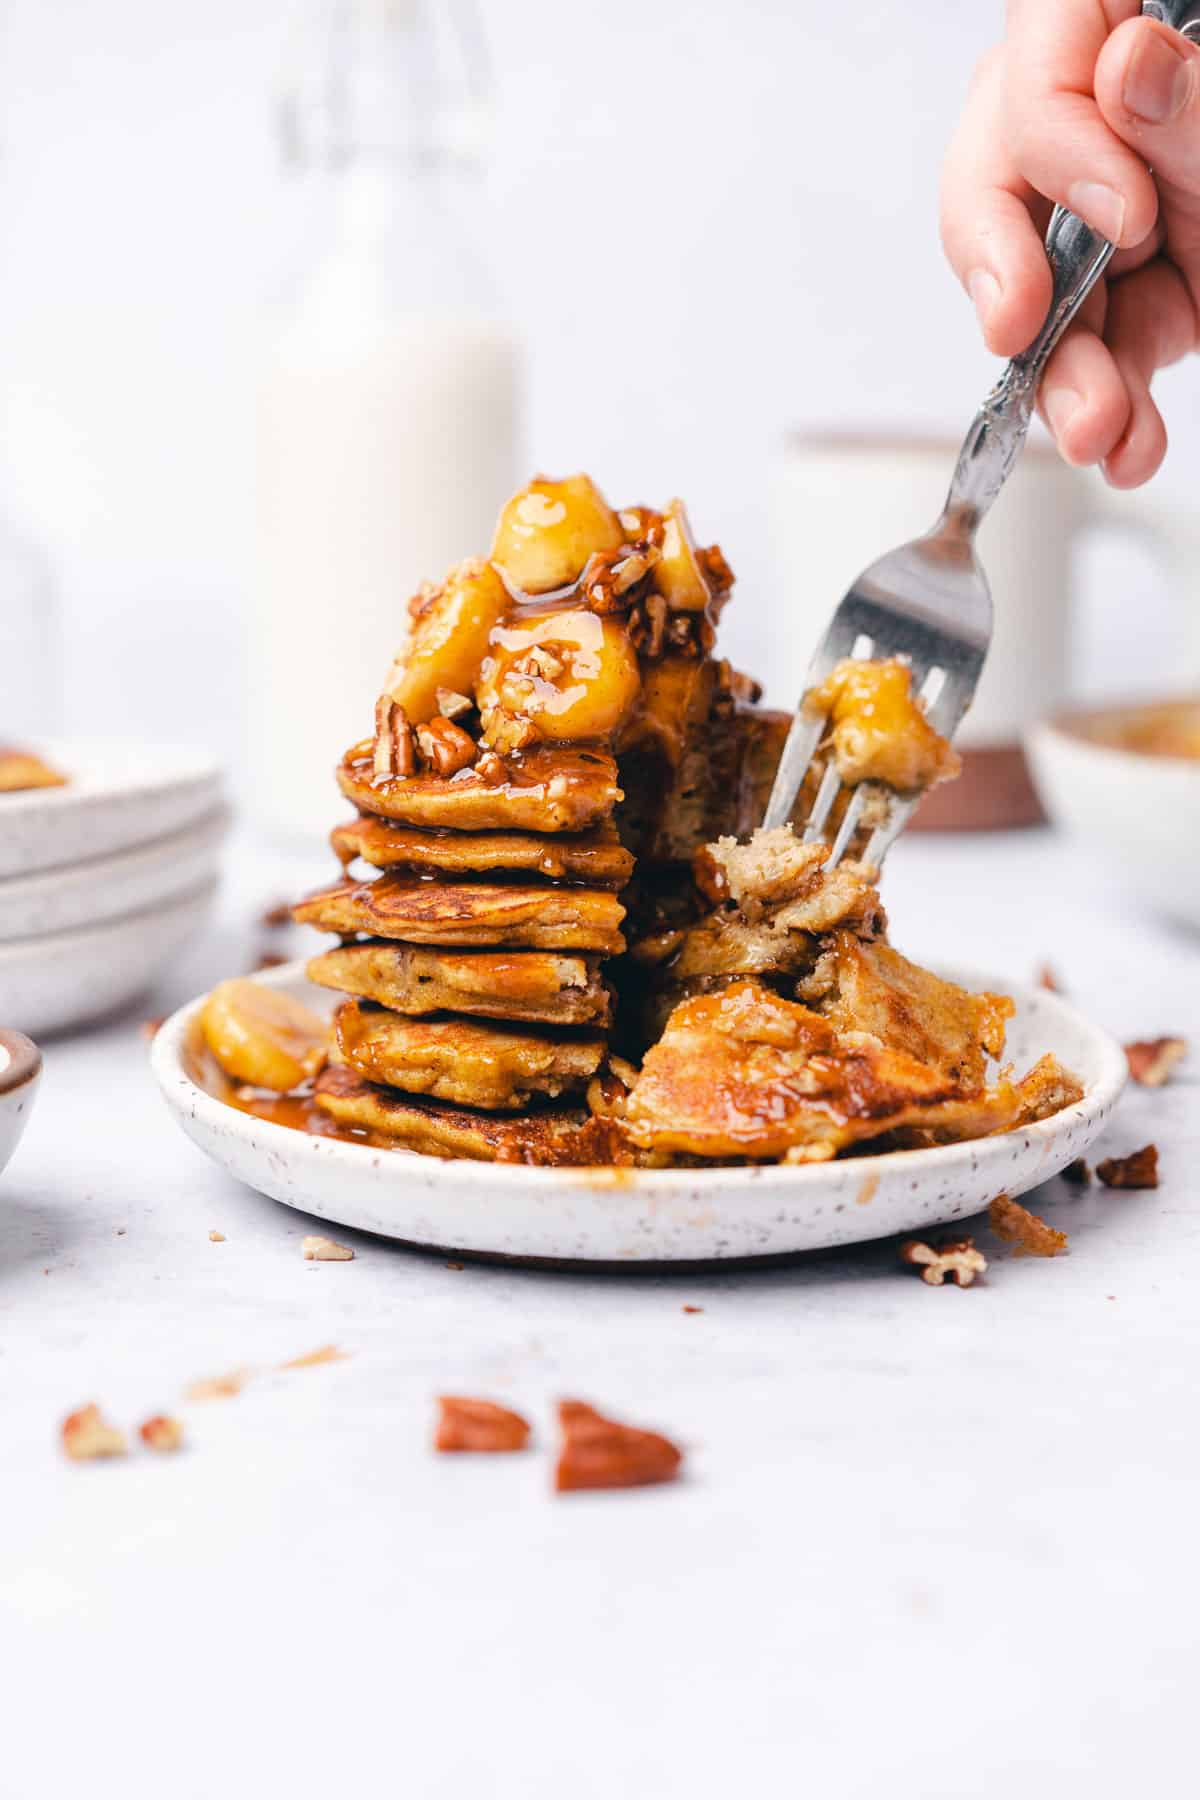 forkful of bananas foster pancakes from a stack